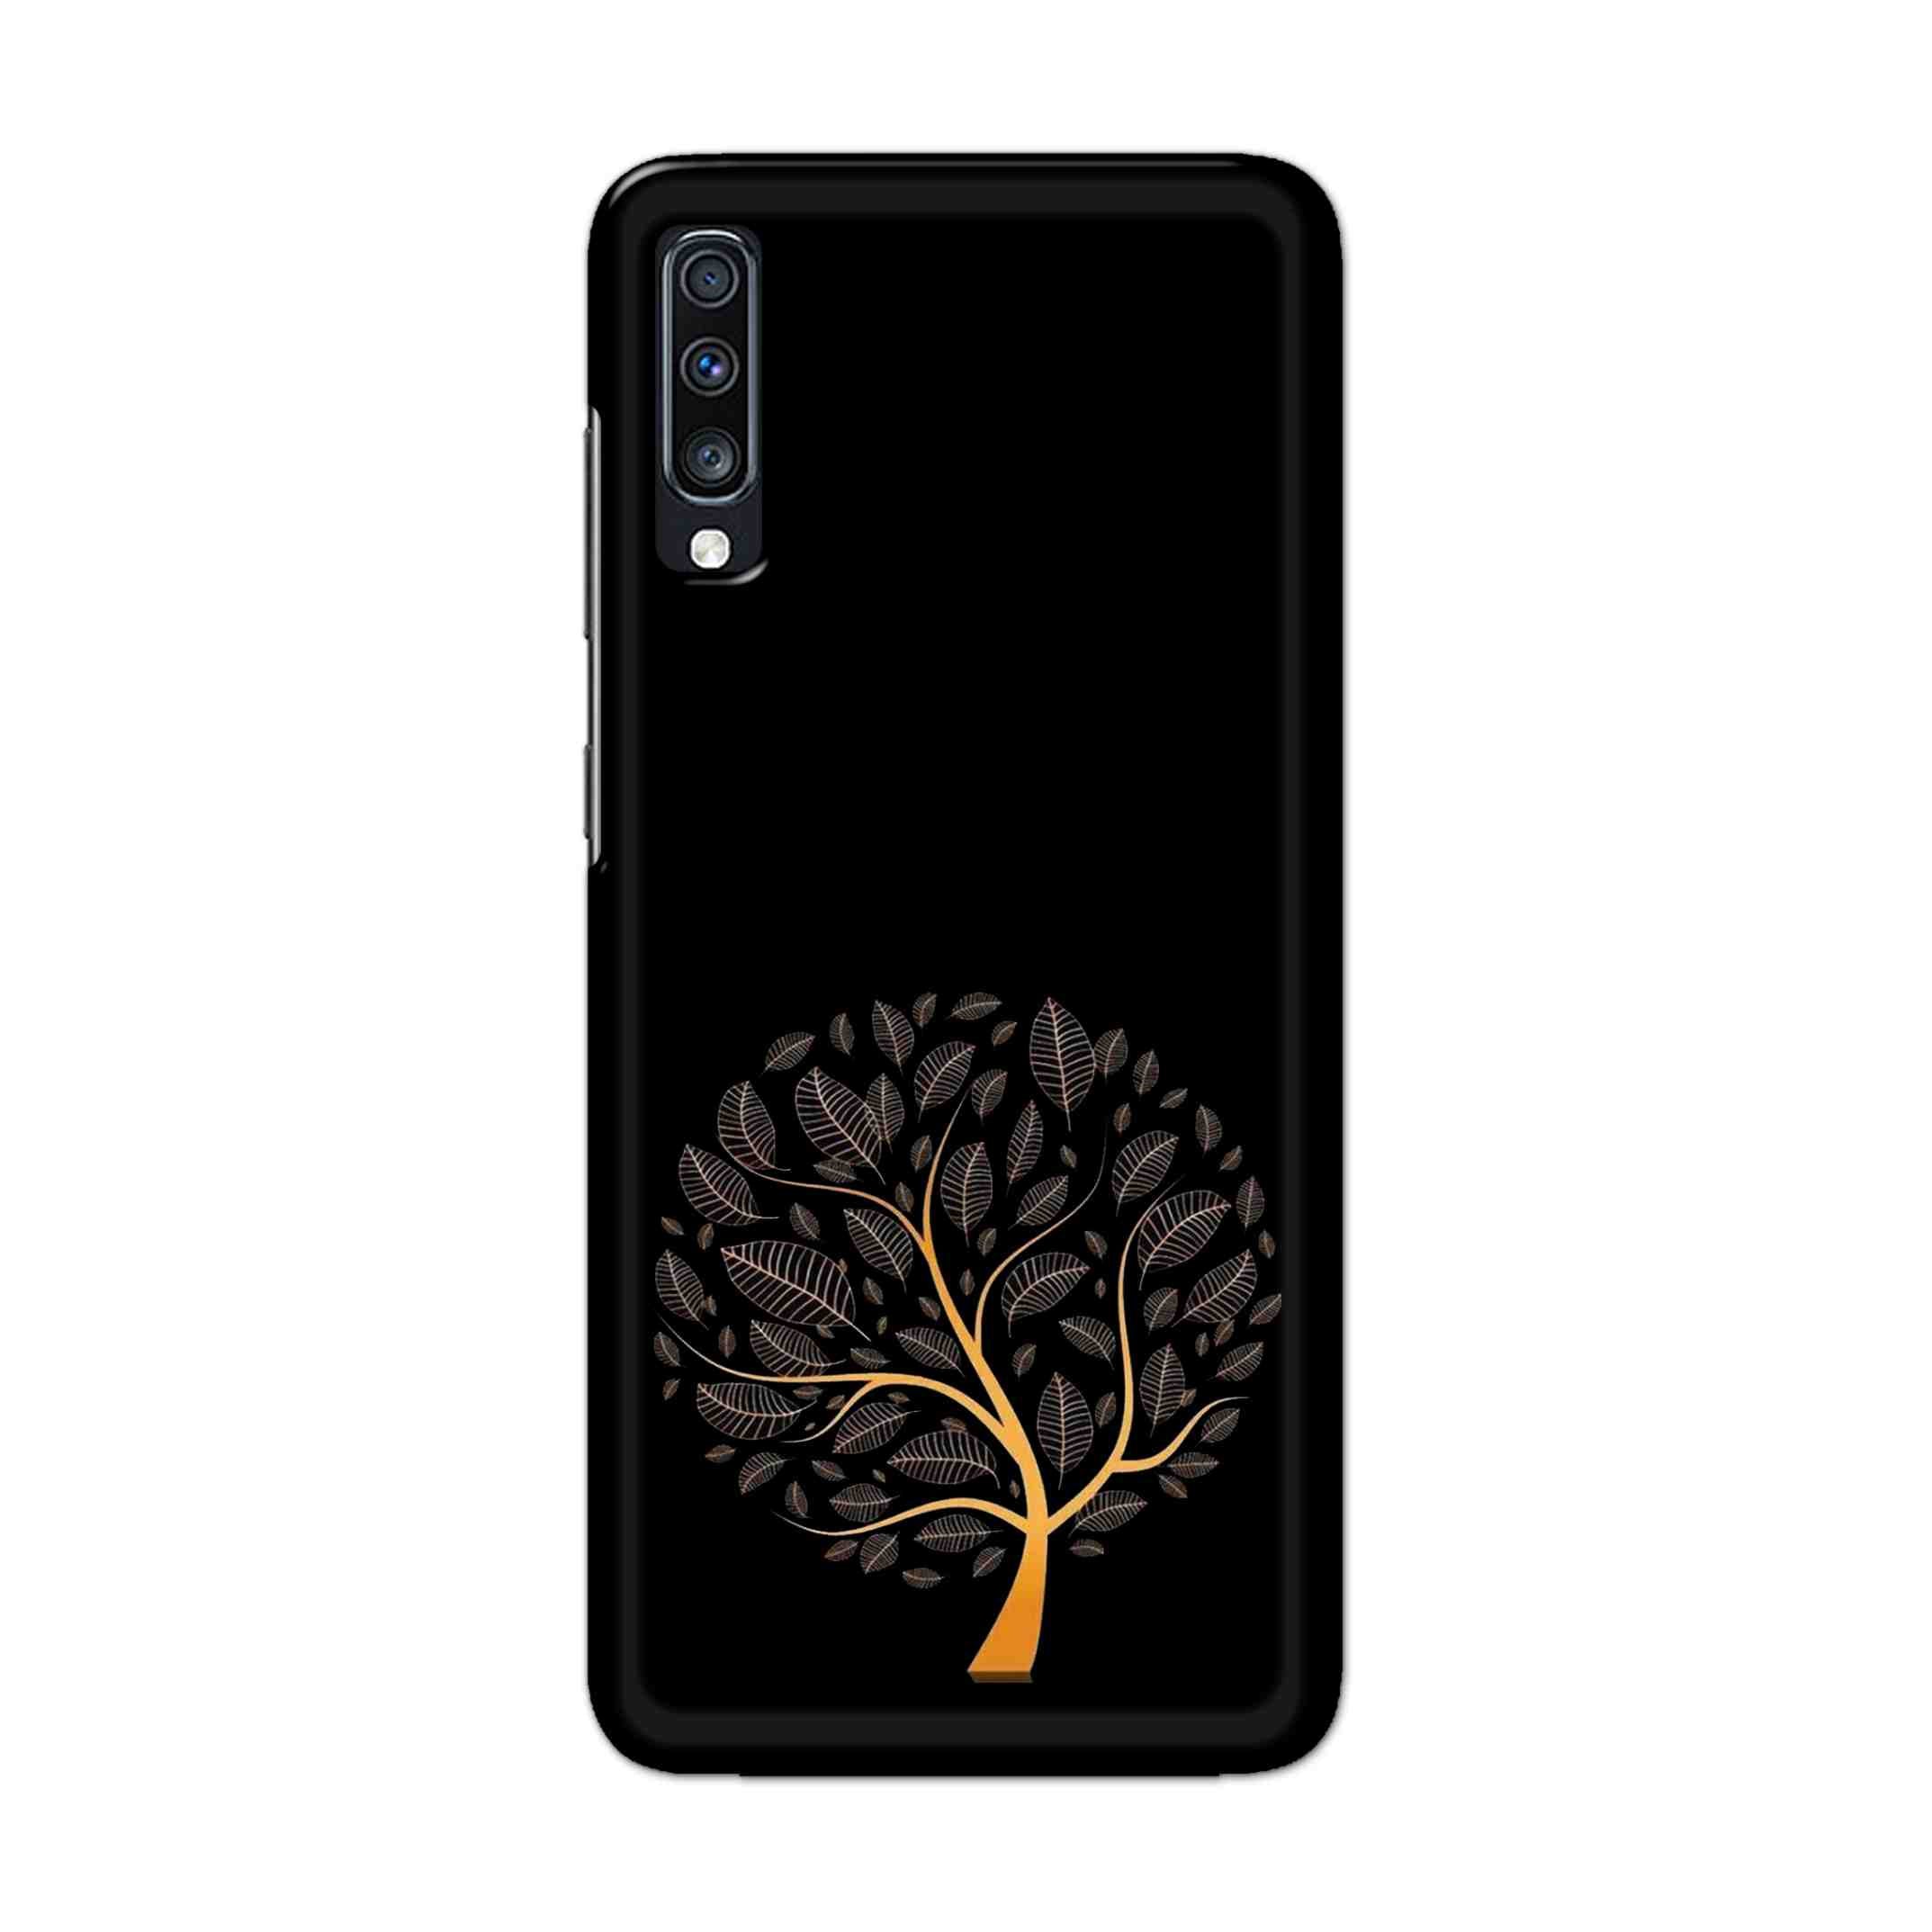 Buy Golden Tree Hard Back Mobile Phone Case Cover For Samsung Galaxy A70 Online